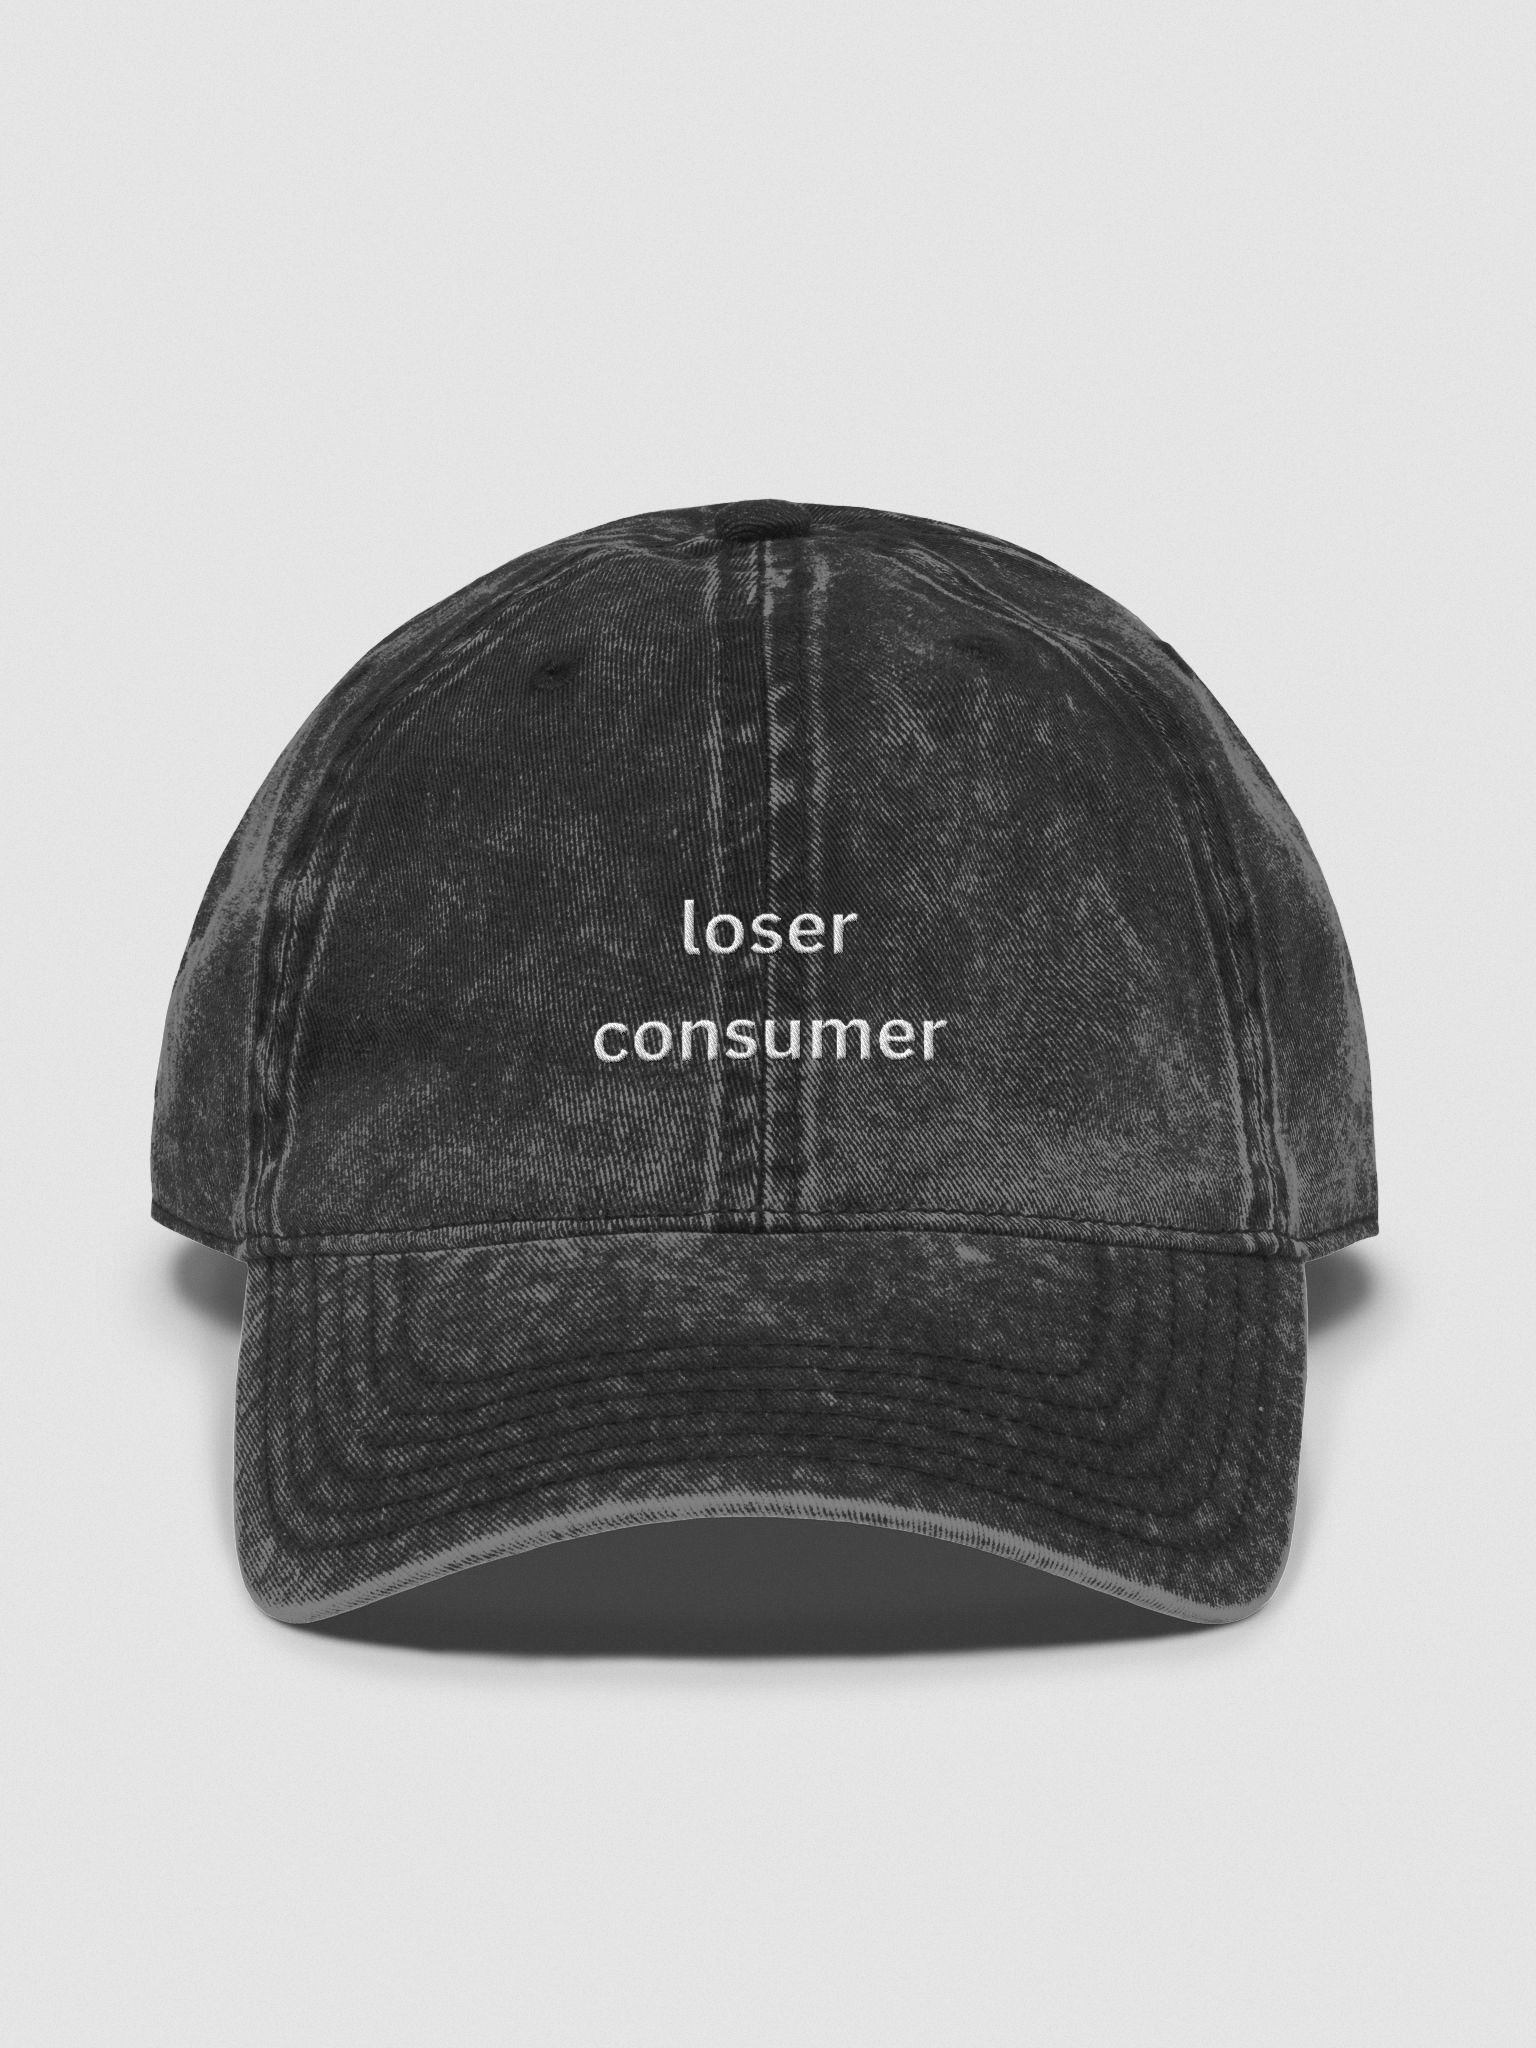 Loser Consumer Hat | The Ben and Emil Show